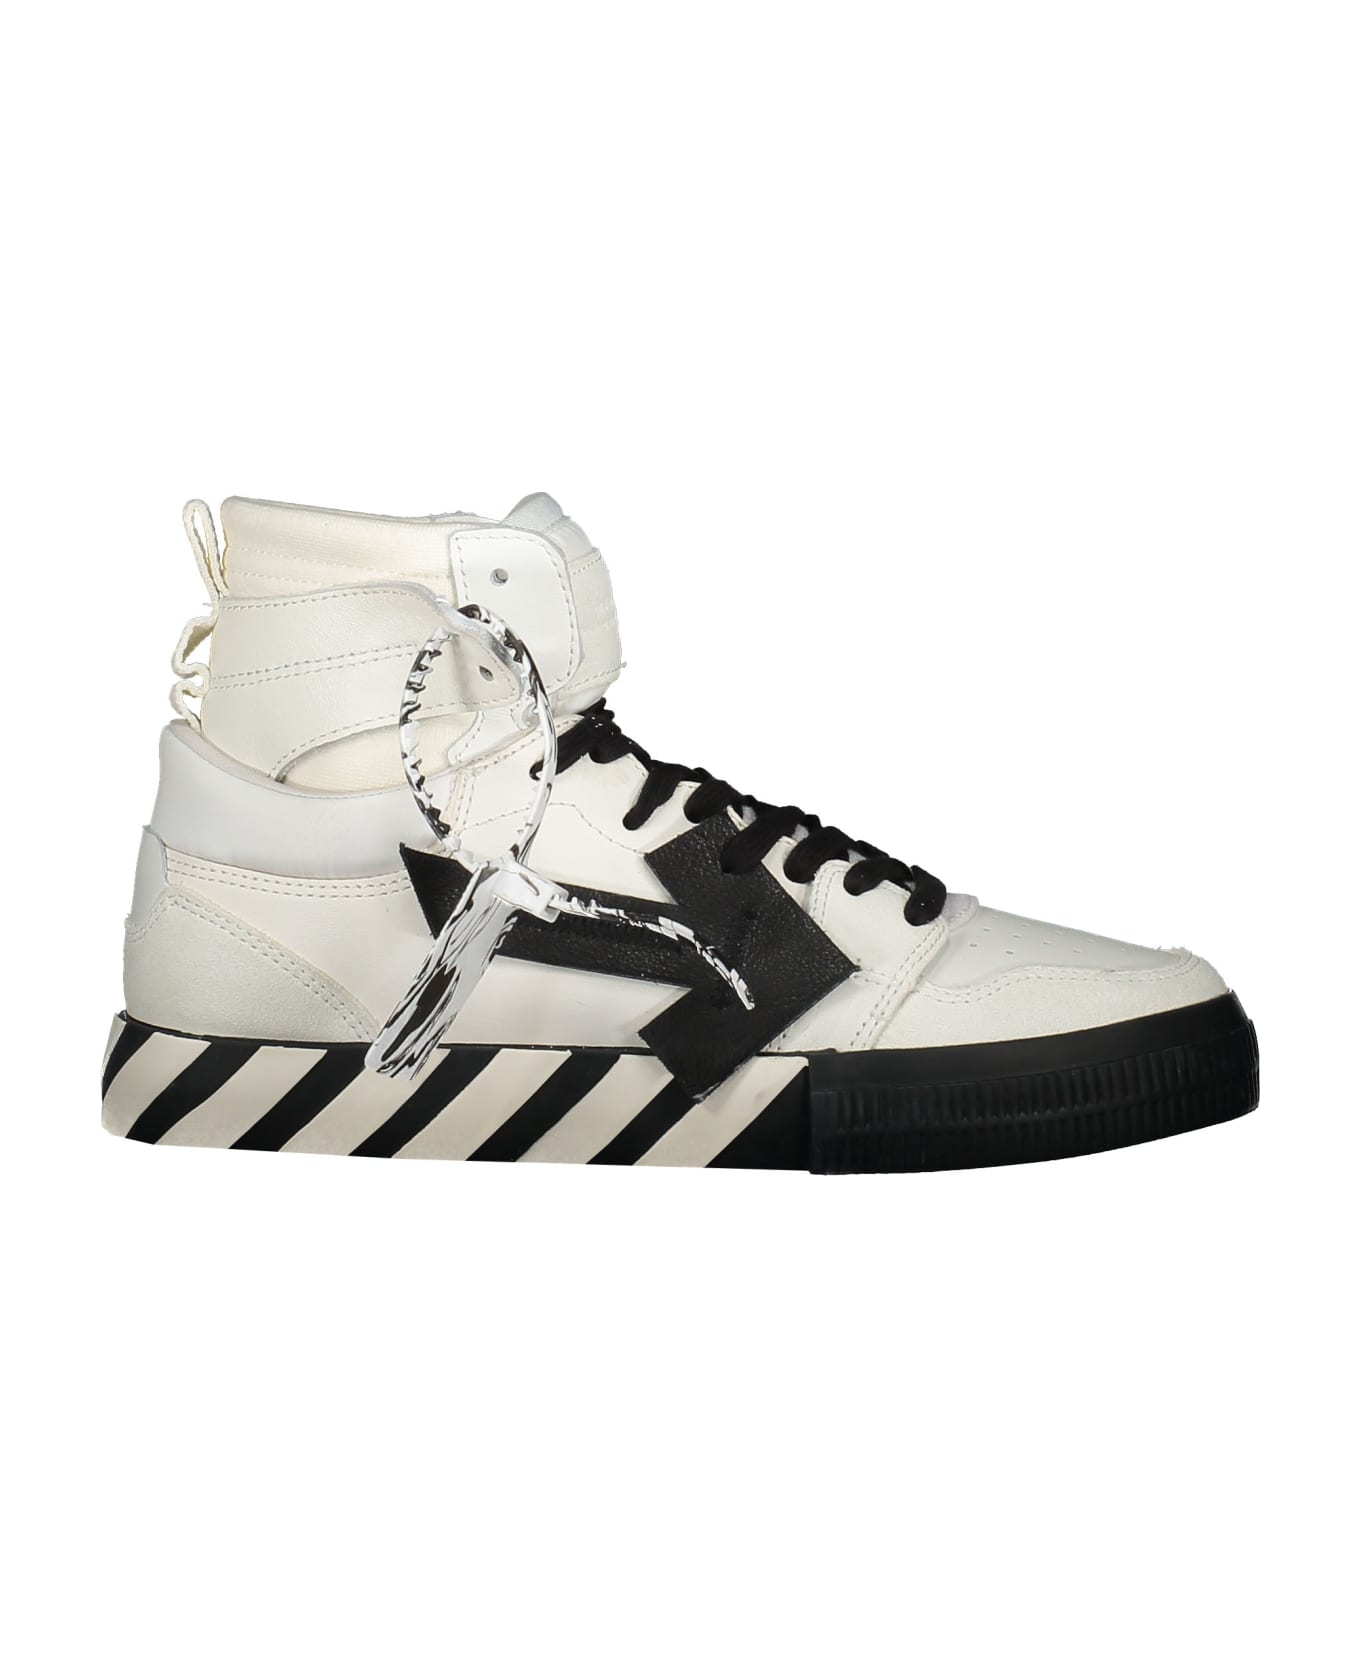 Off-White Vulcanized High-top Sneakers - White